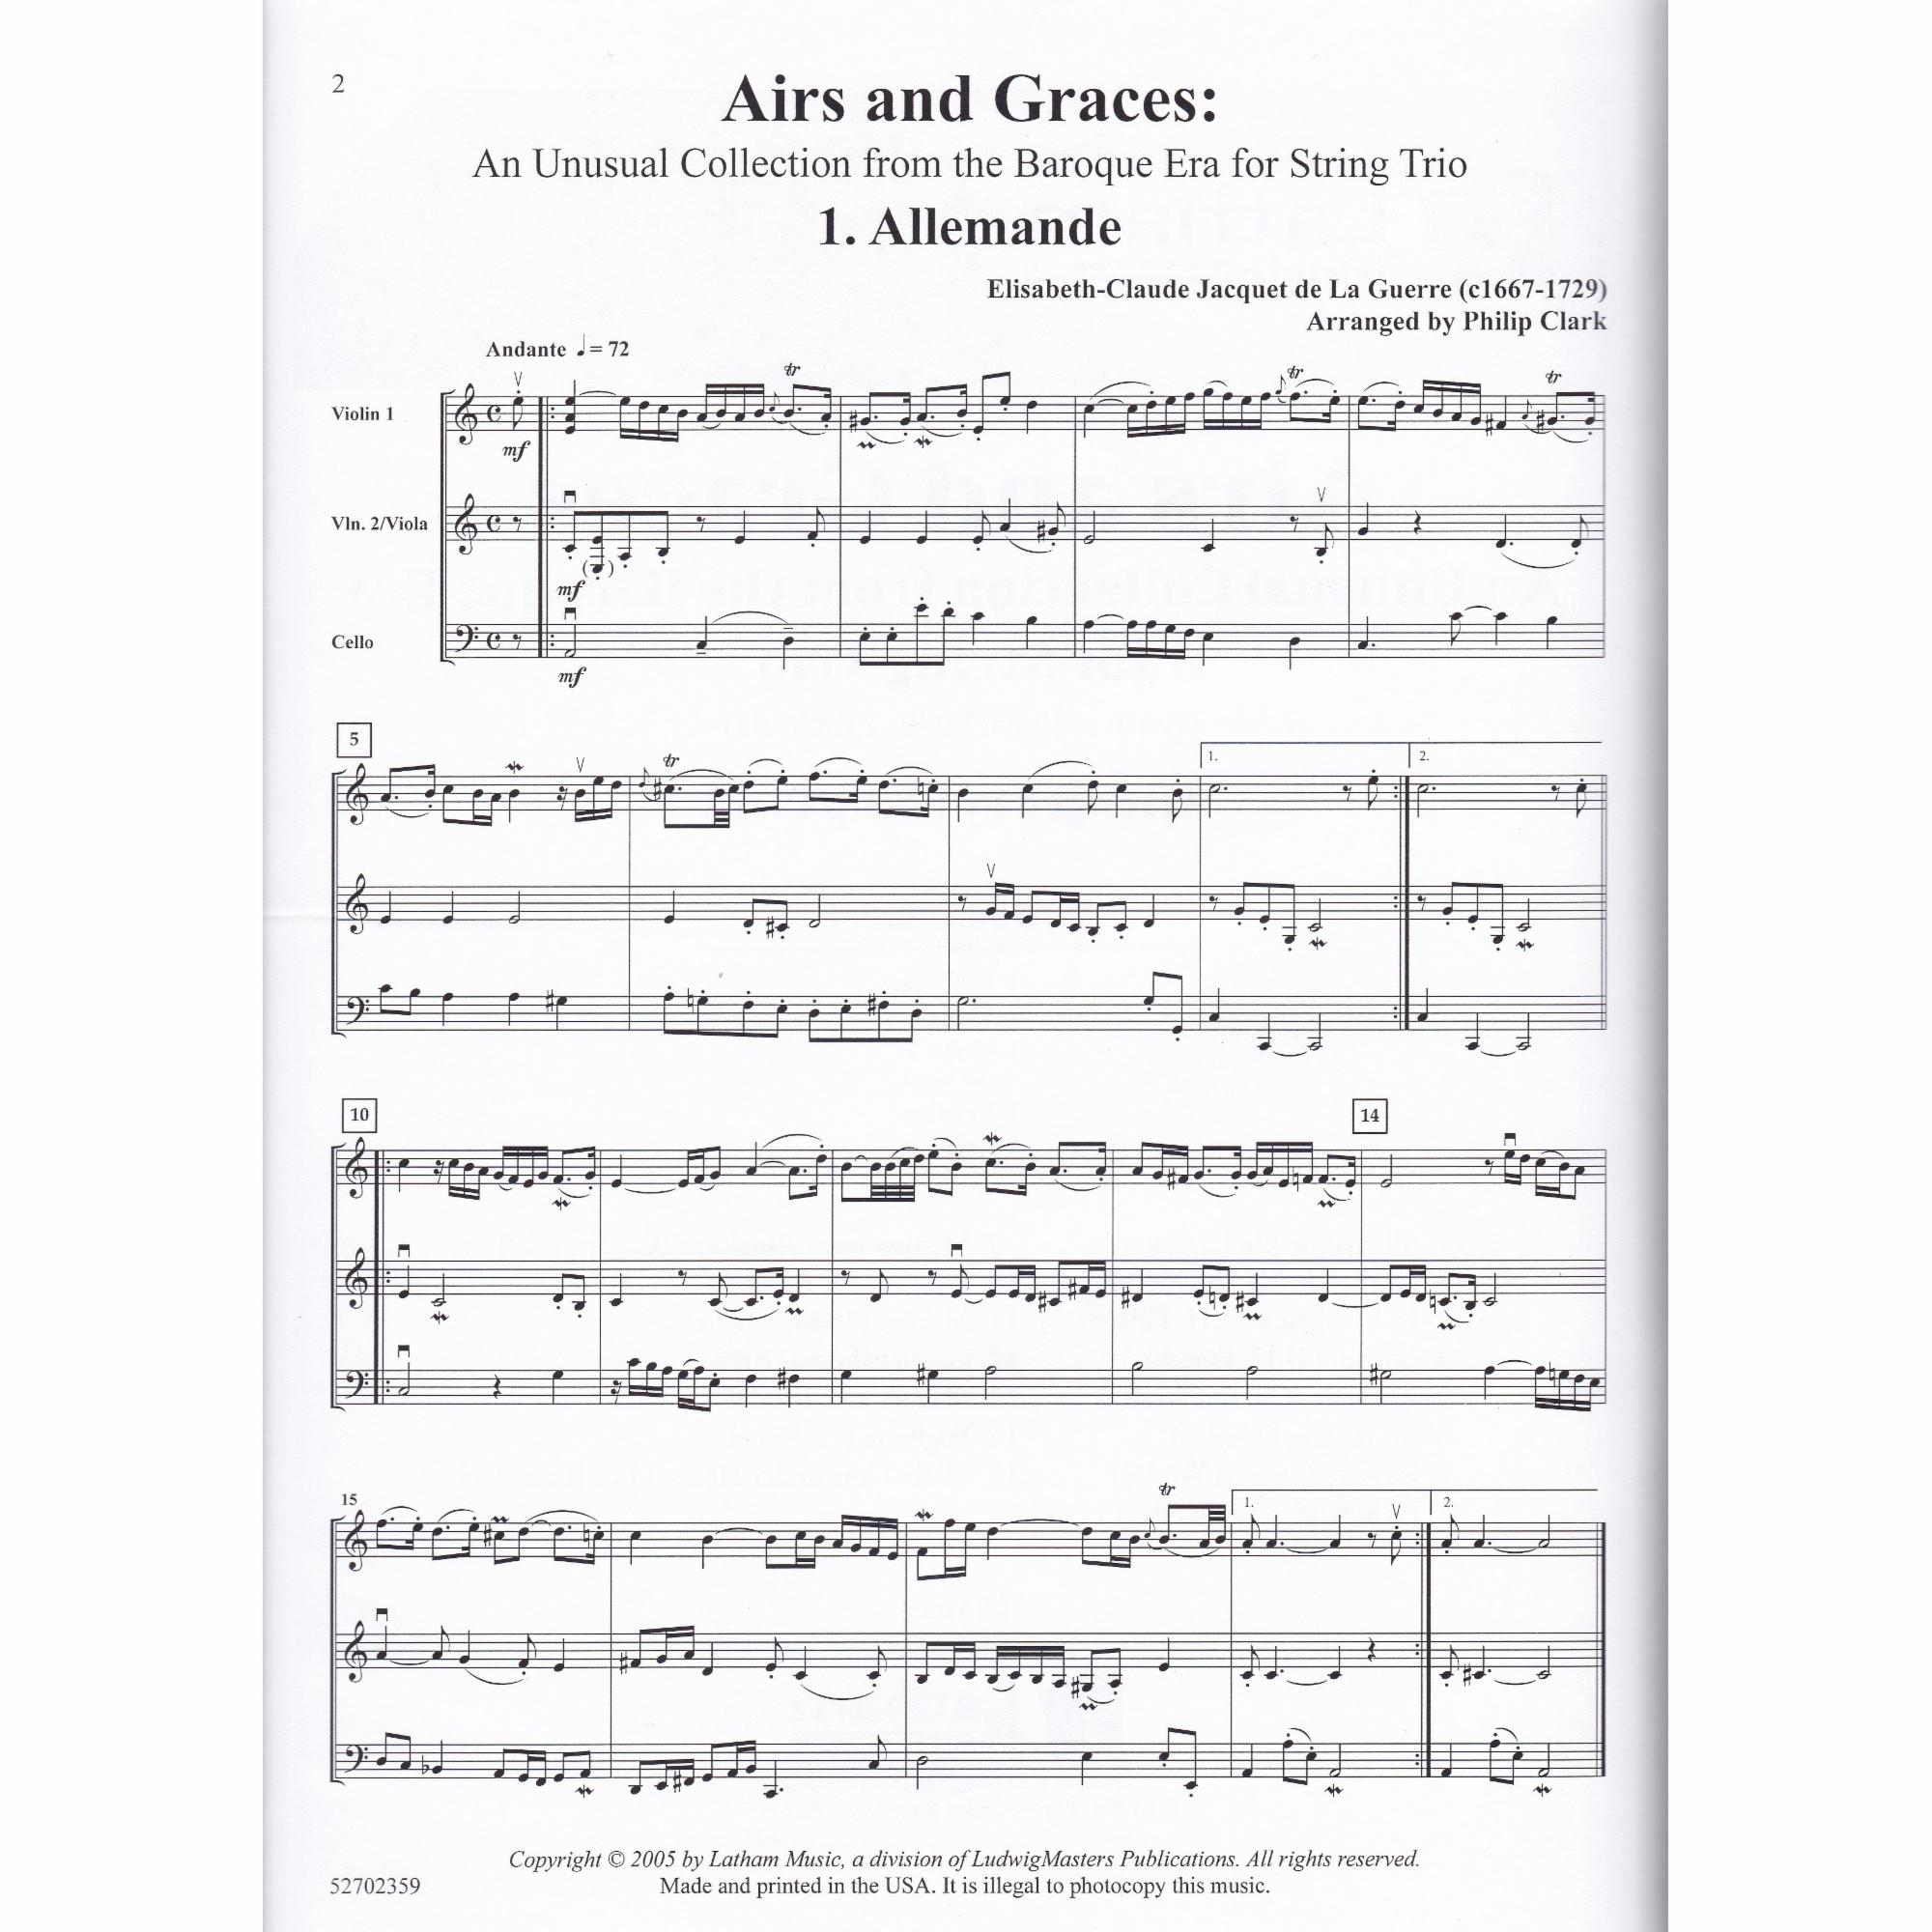 Airs and Graces: An Unusual Collection from the Baroque Era for String Trio